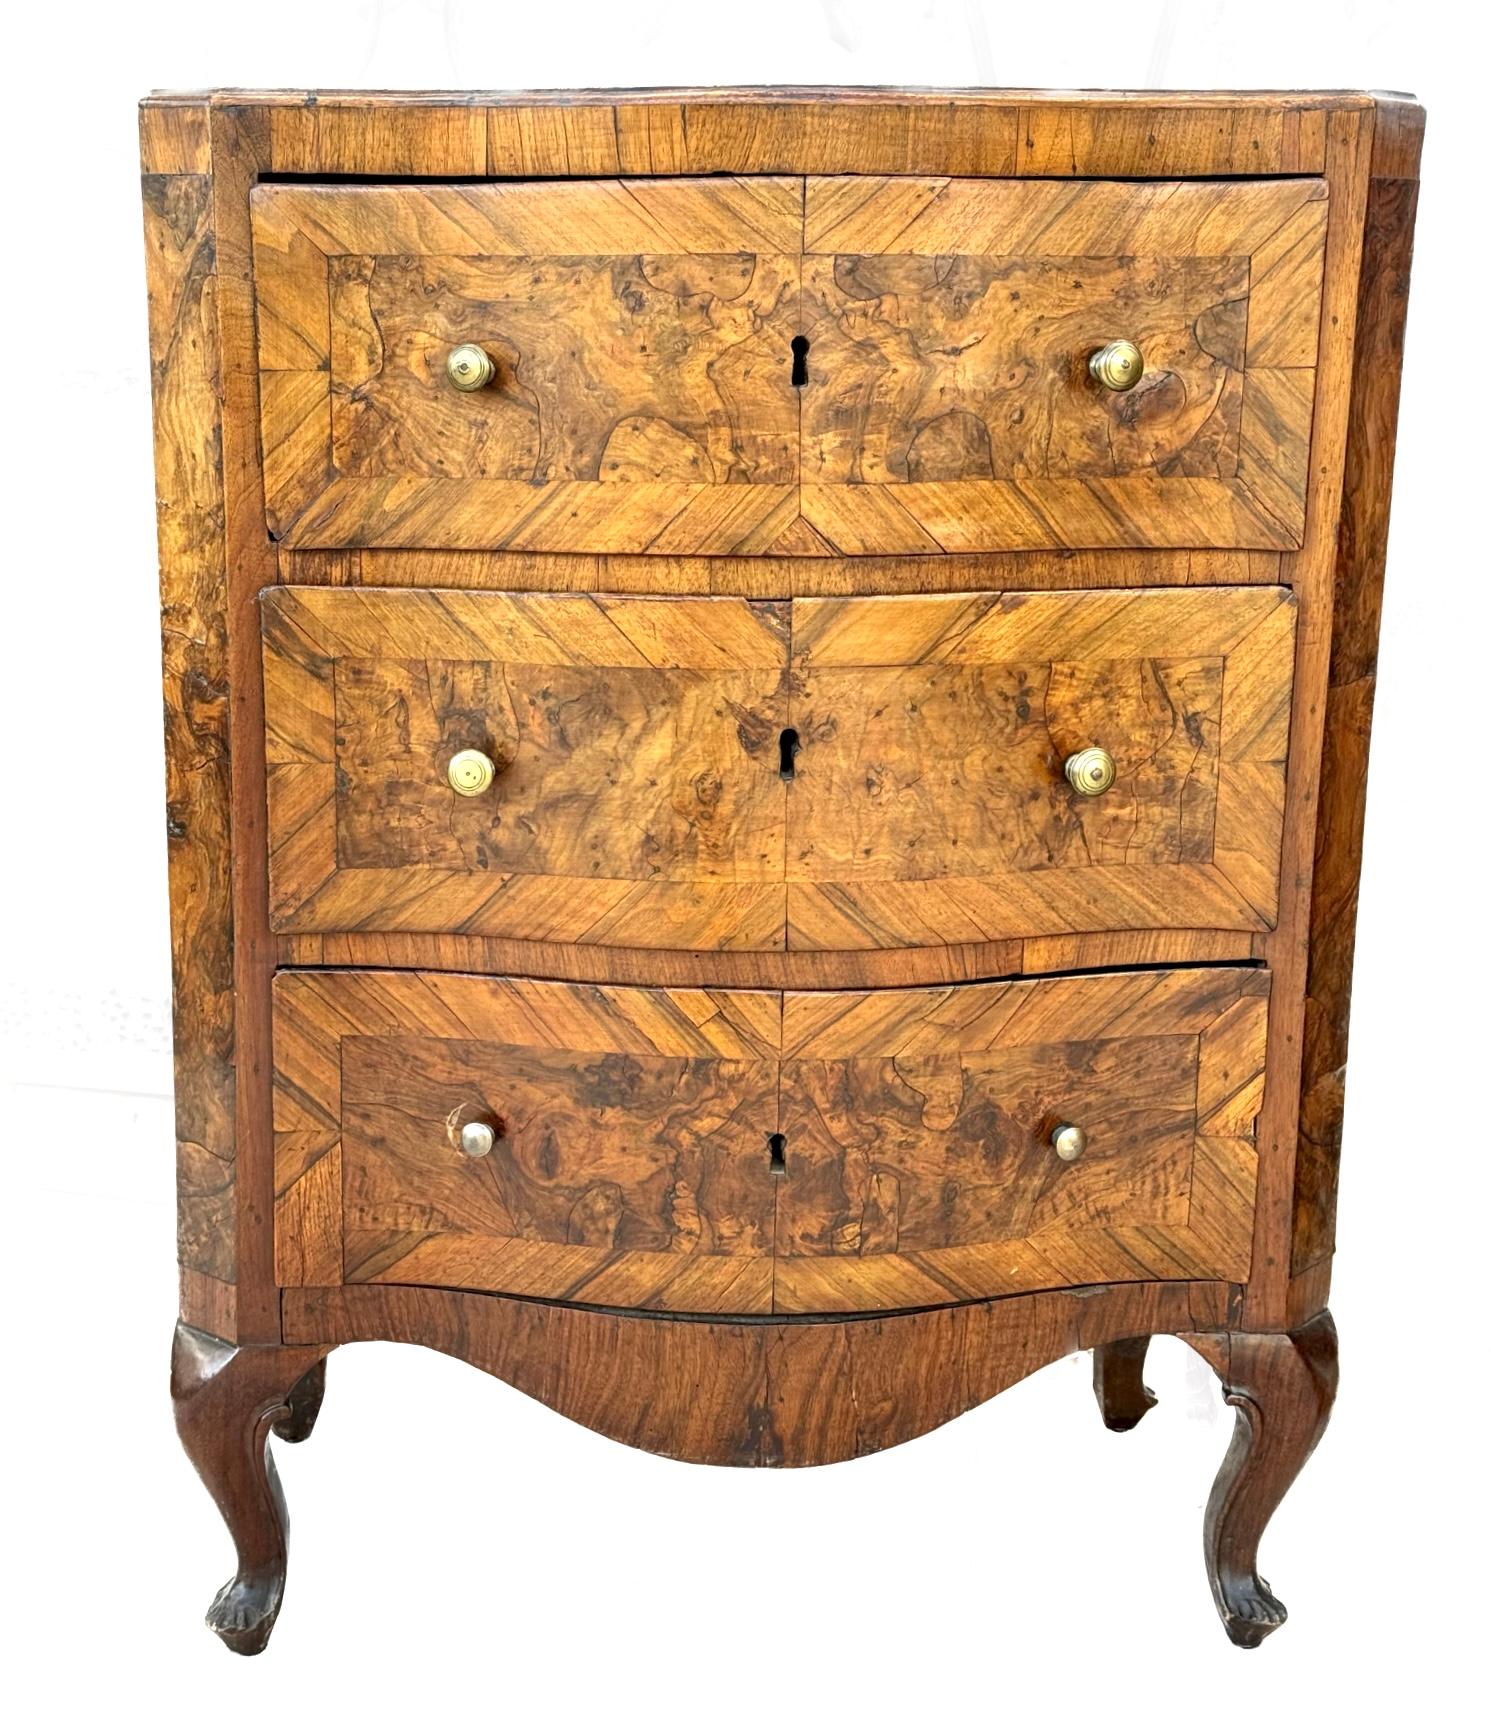 Rare and very fine quality pair of 18th century Italian burl walnut bedside cabinets. One cabinet has three drawers, while other cabinet has a trompe l'oeil front that looks like drawer fronts yet opens as a single door with two shelves inside.